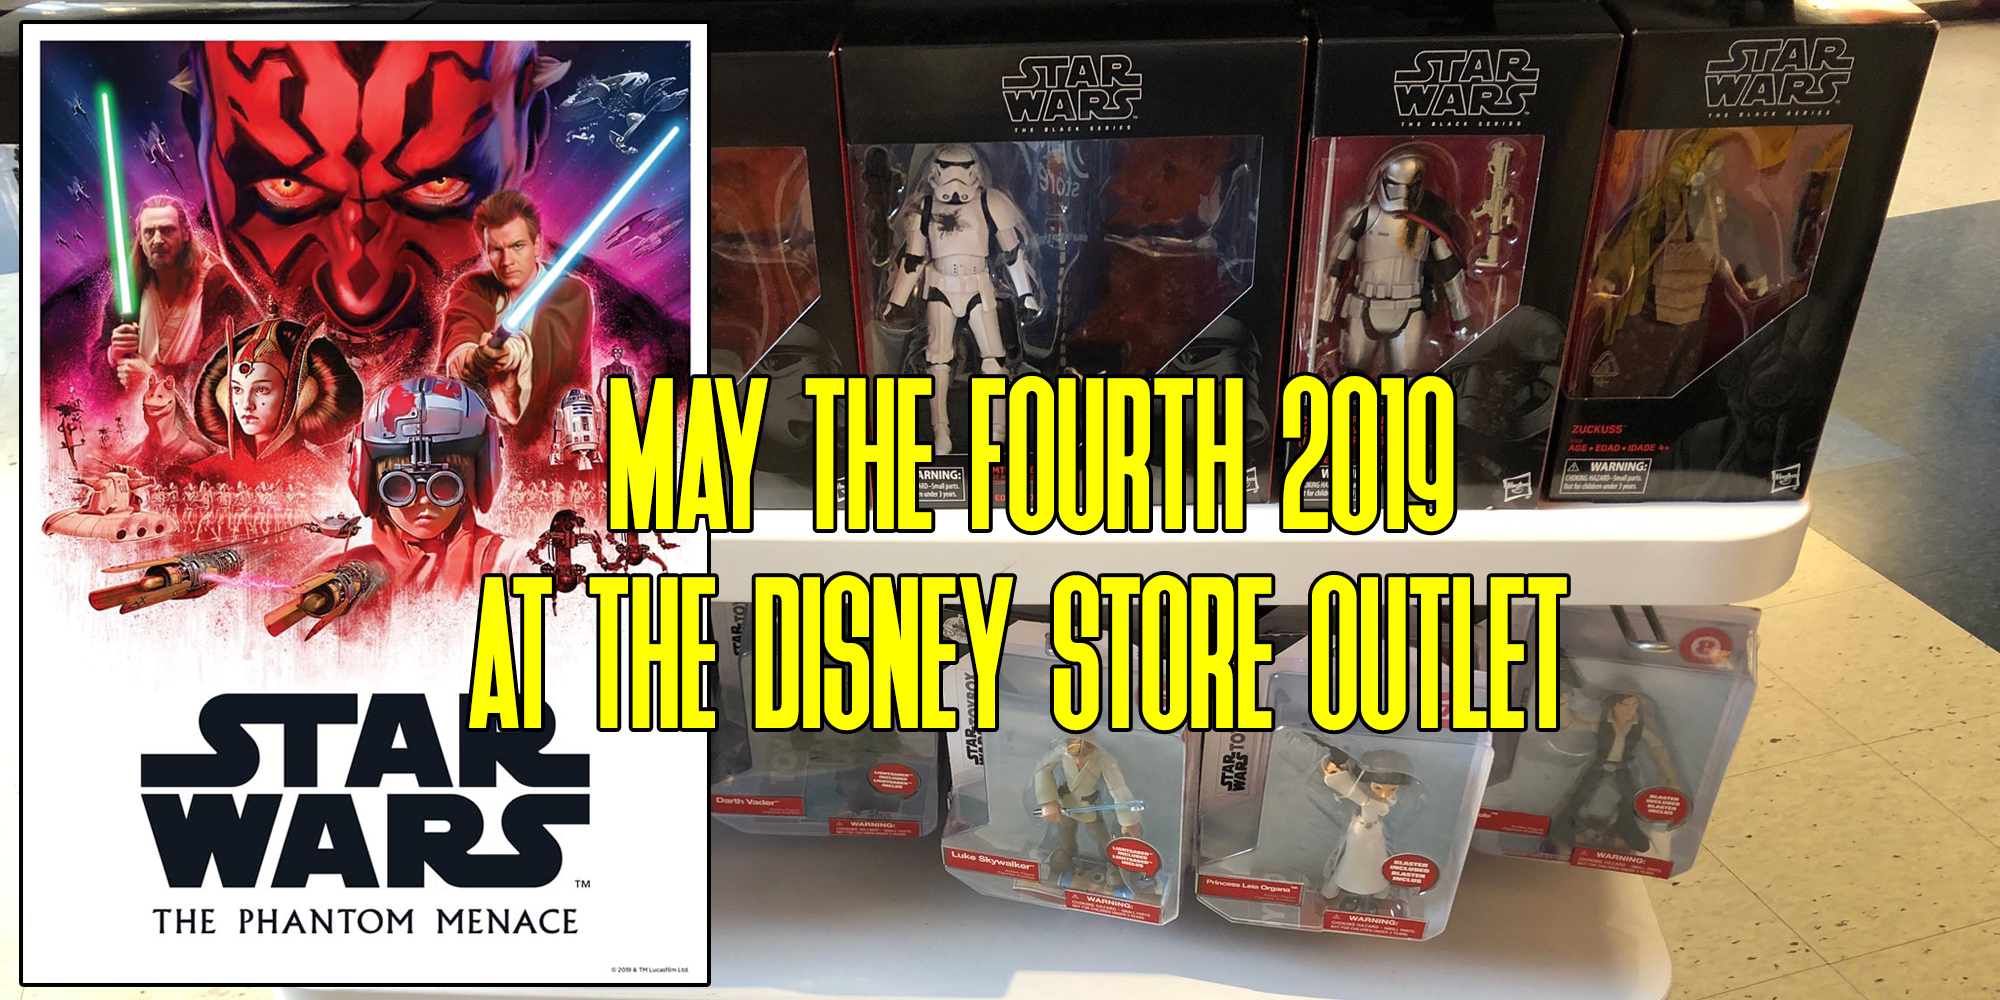 May The Fourth At The Disney Store Outlet!